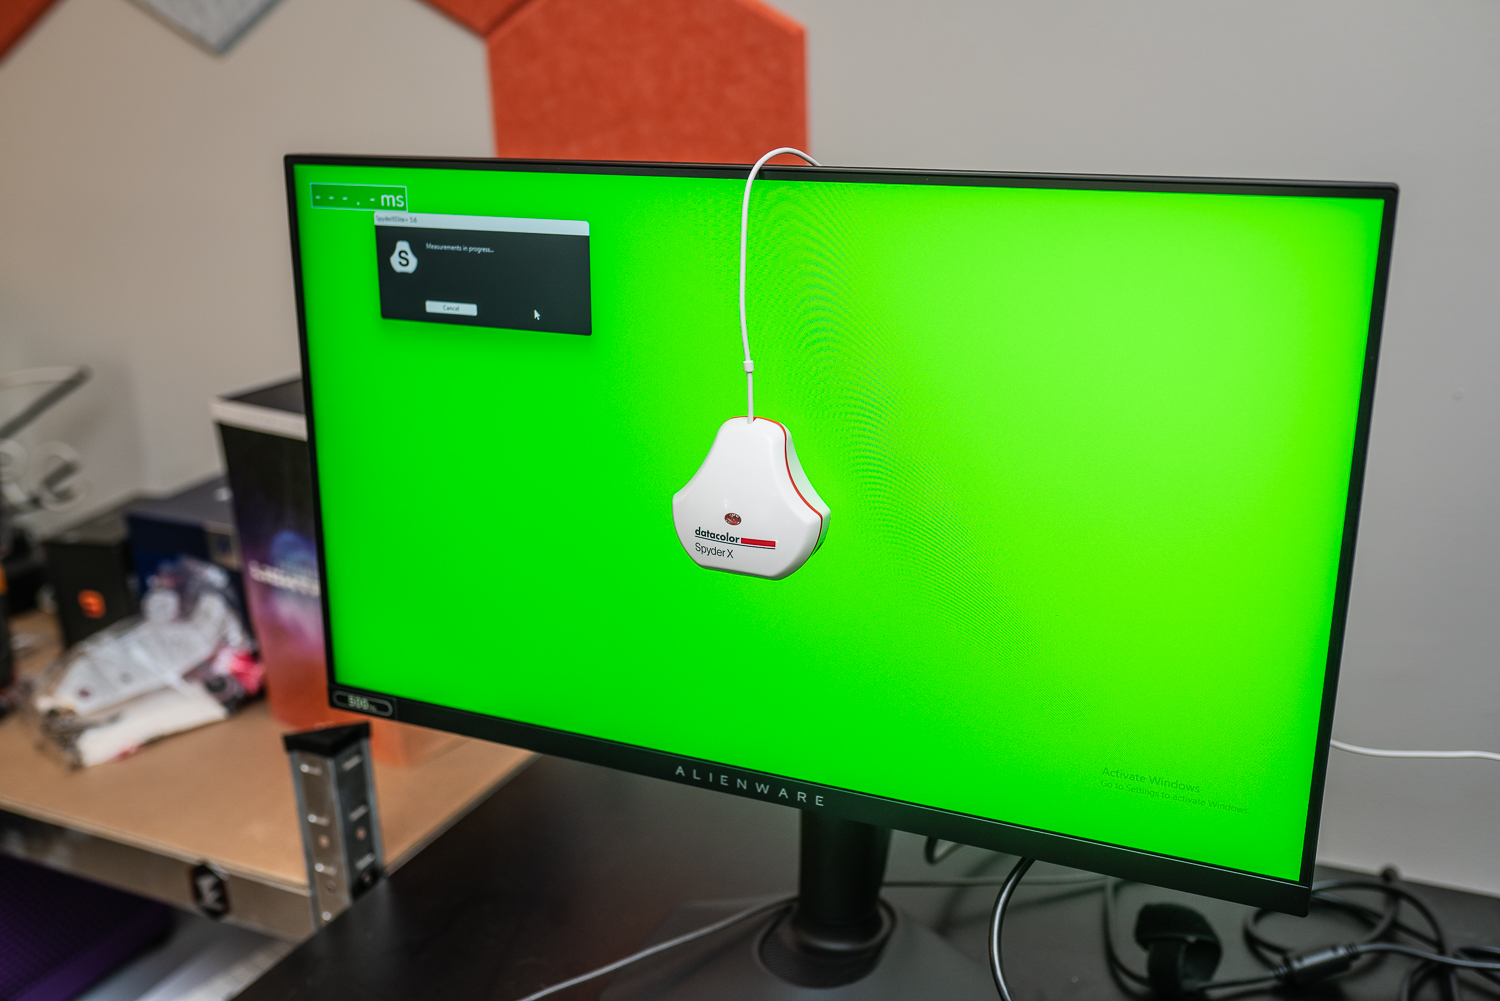 Alienware 500Hz gaming monitor review: one for the pros